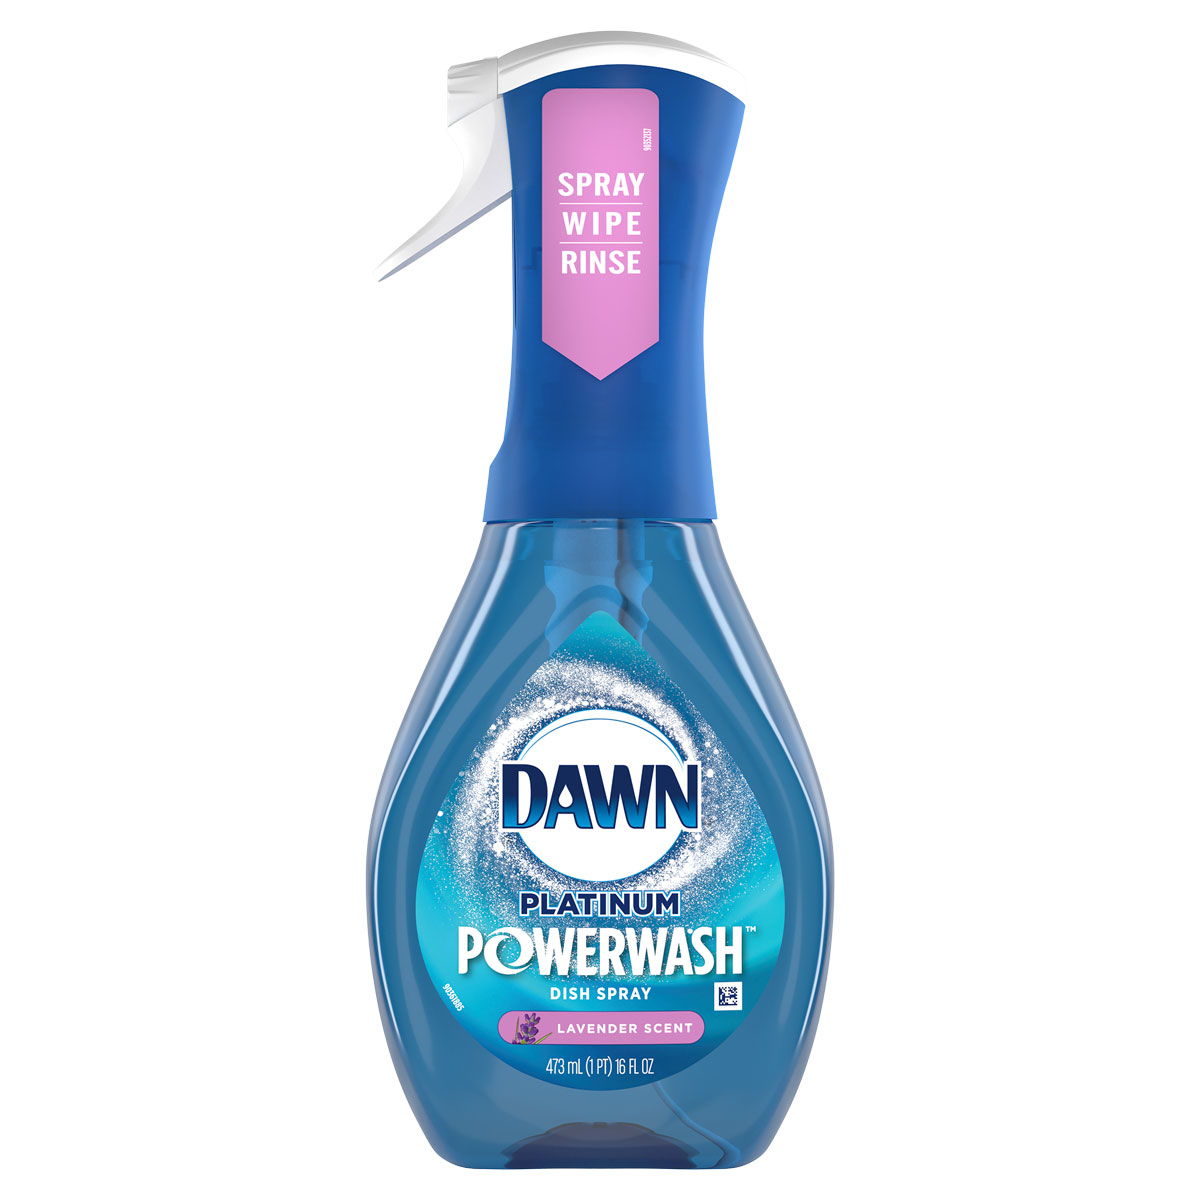 Dawn Powerwash Spray + 3 Refills Just $12 Shipped for  Prime Members  (Team-Fave Cleaning Product!)